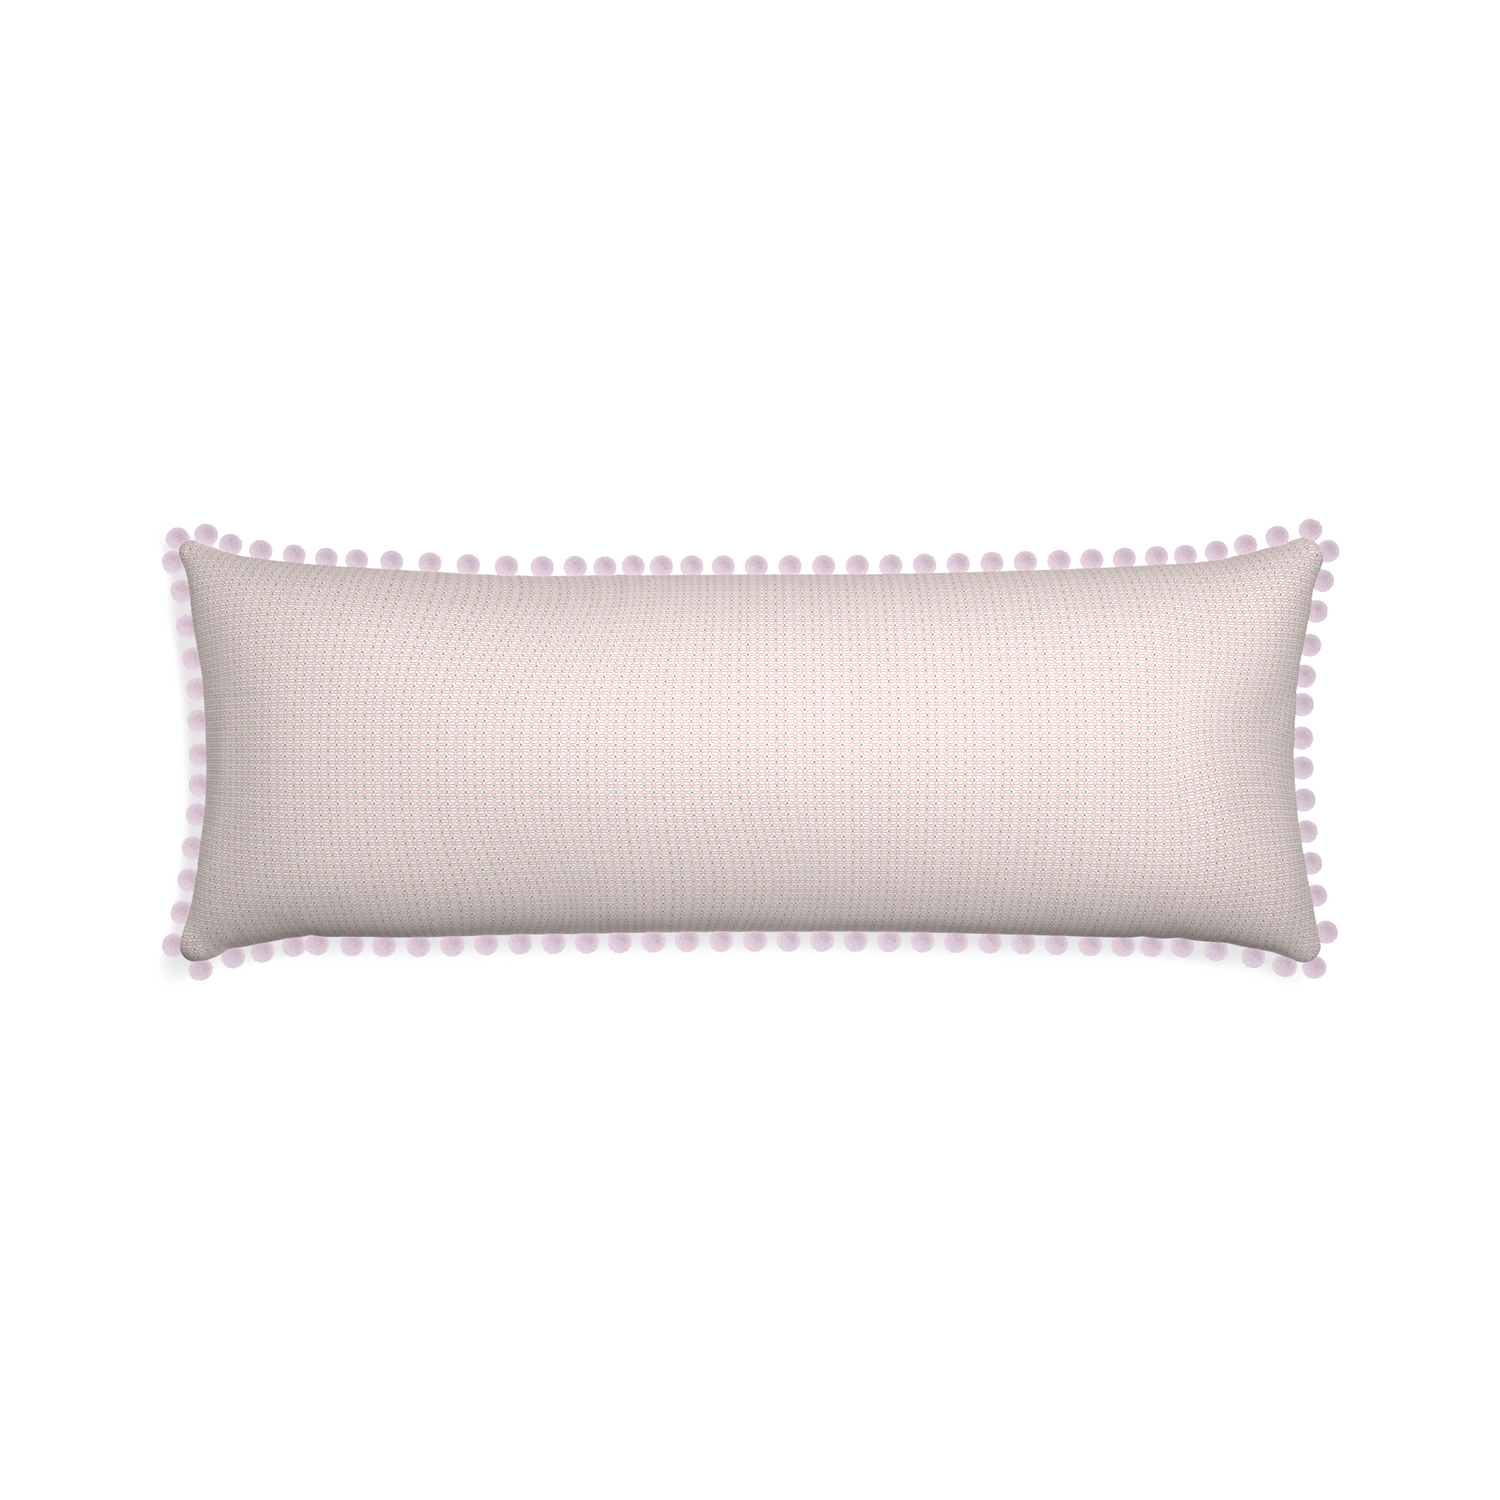 Xl-lumbar loomi pink custom pillow with l on white background